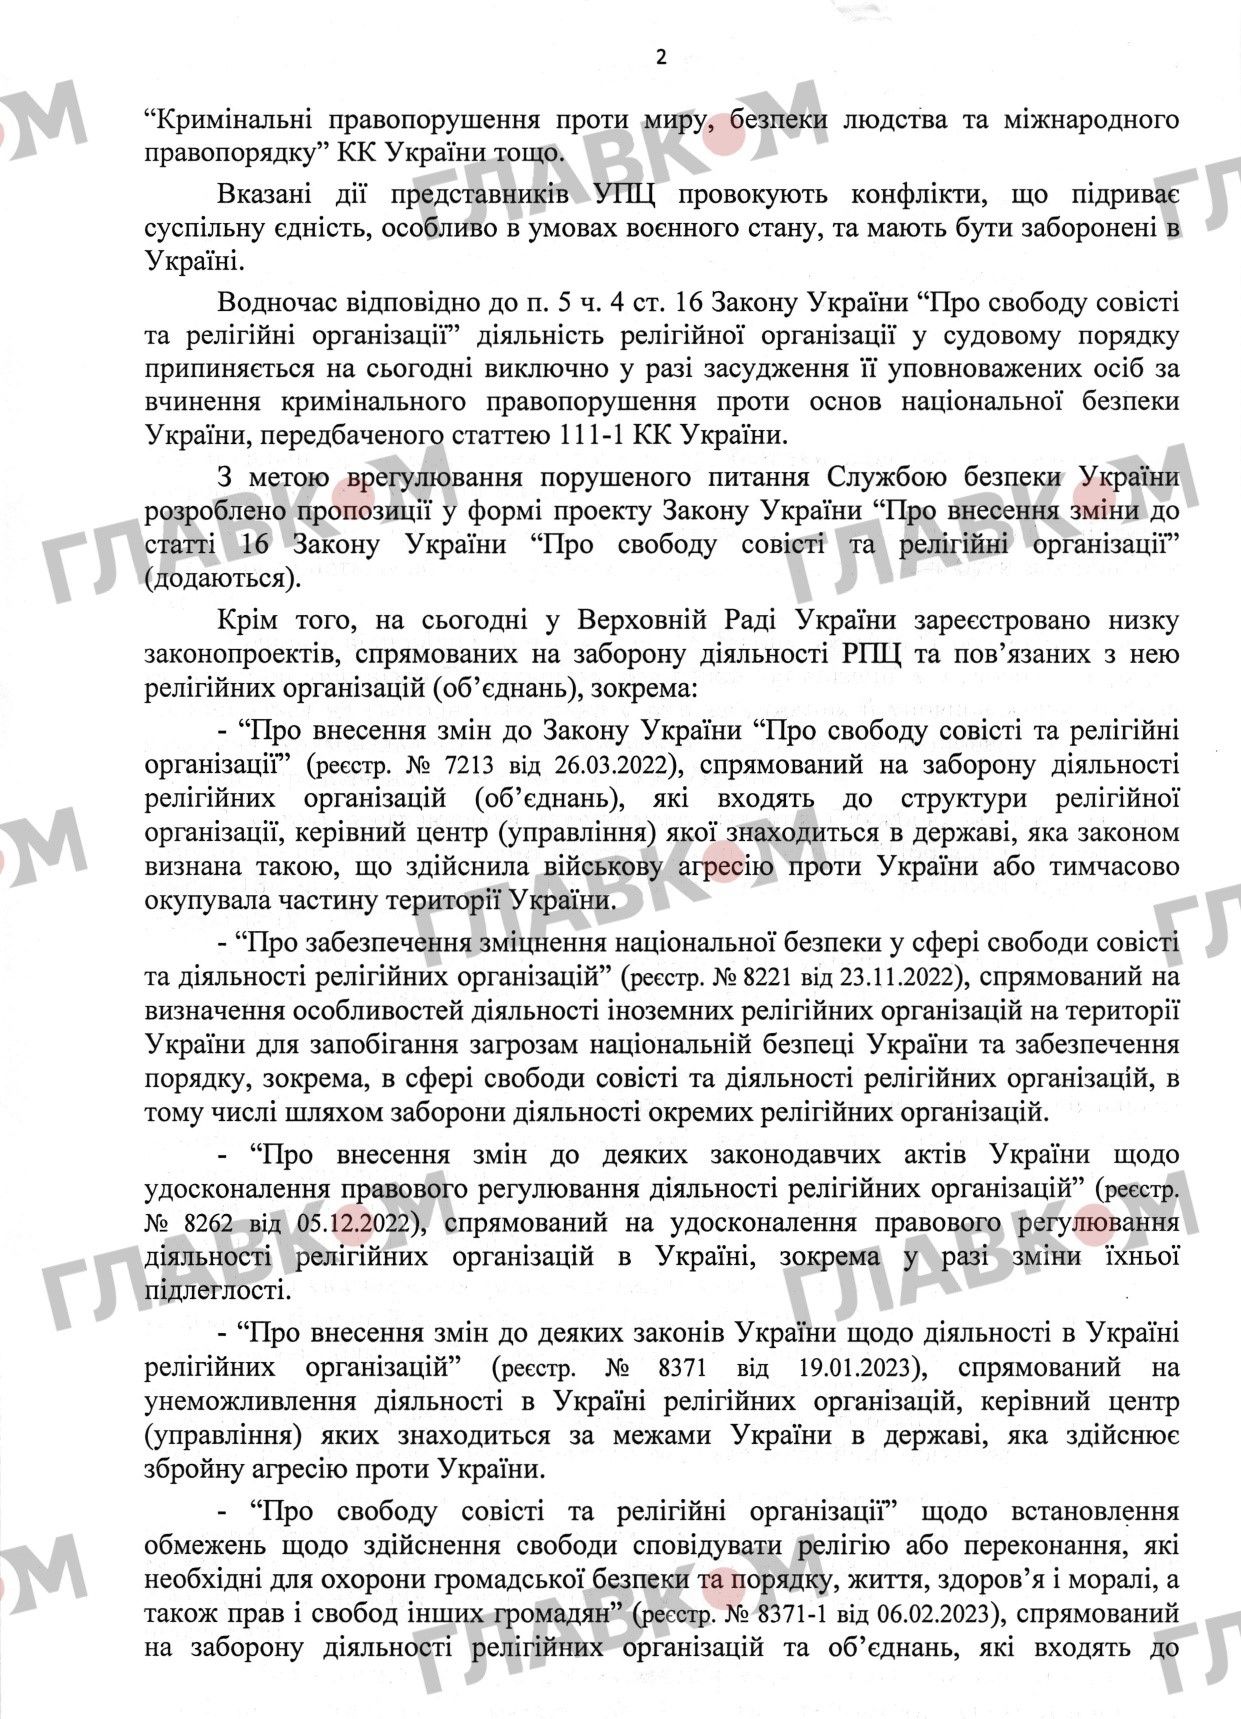 SBU initiated an increase of legal grounds to dissolve religious organizations - фото 122605